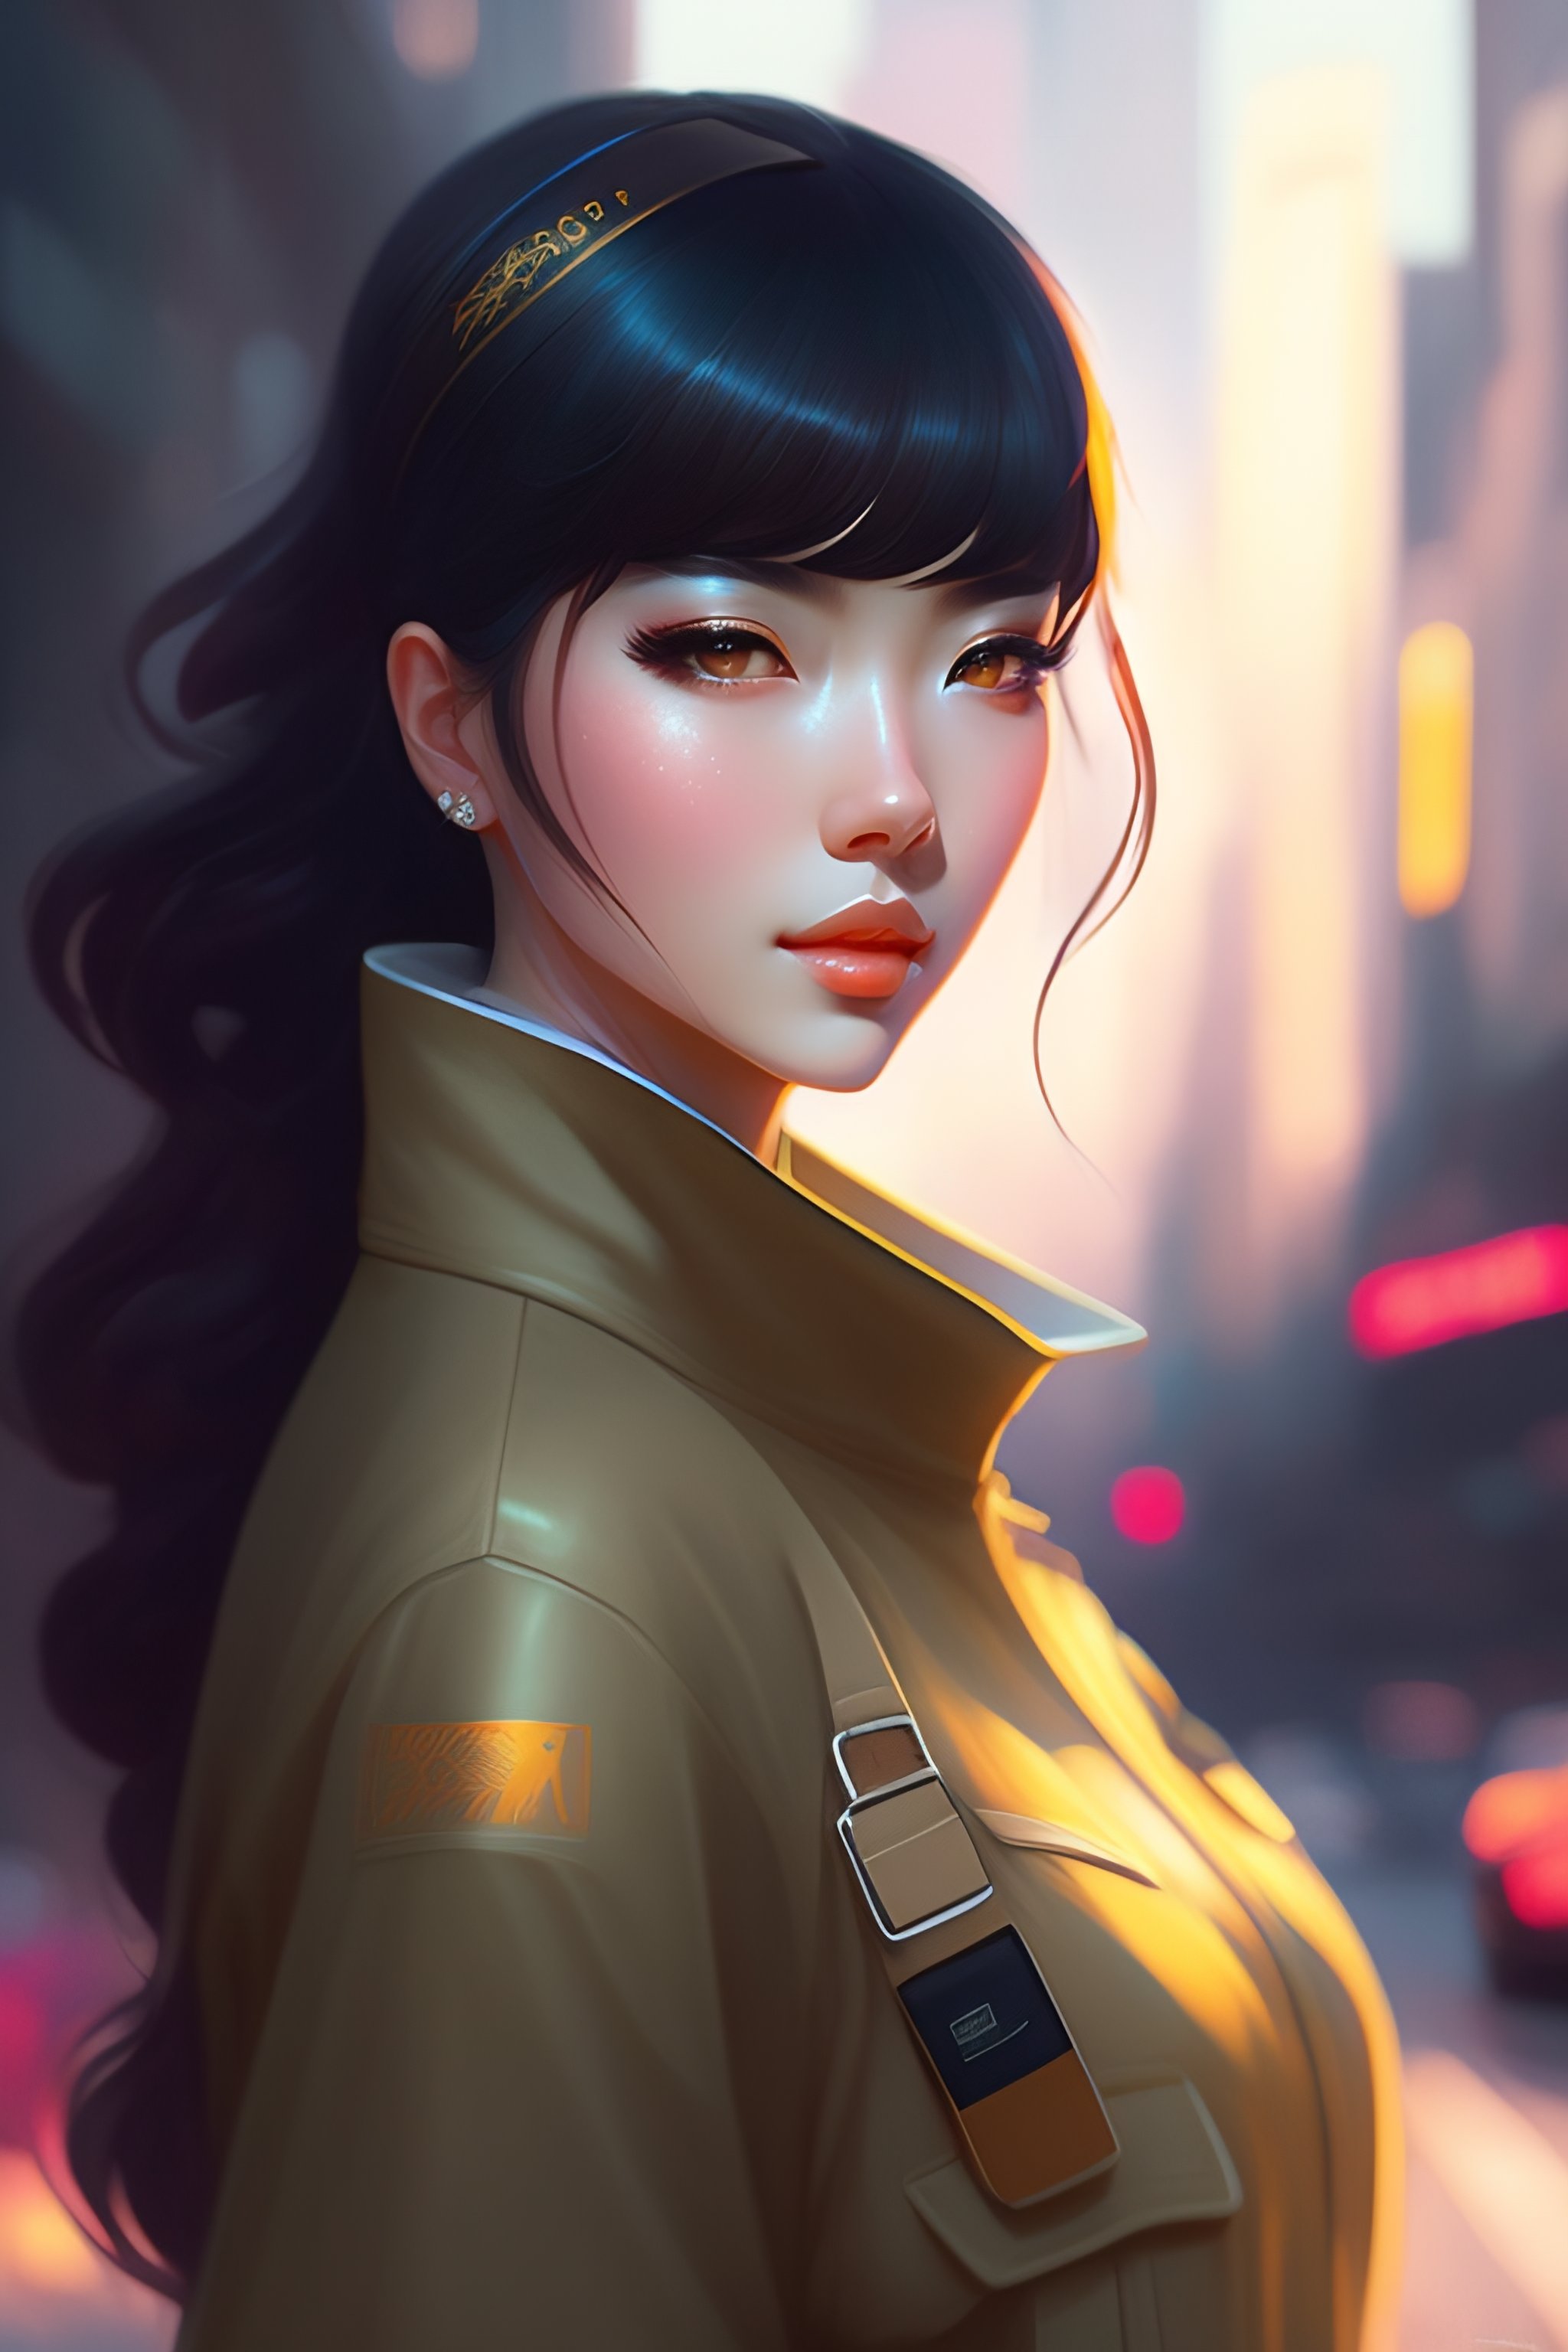 Lexica Elegant Girl In Urban Outfit Cute Fine Face Rounded Eyes Digital Painting Fan Art